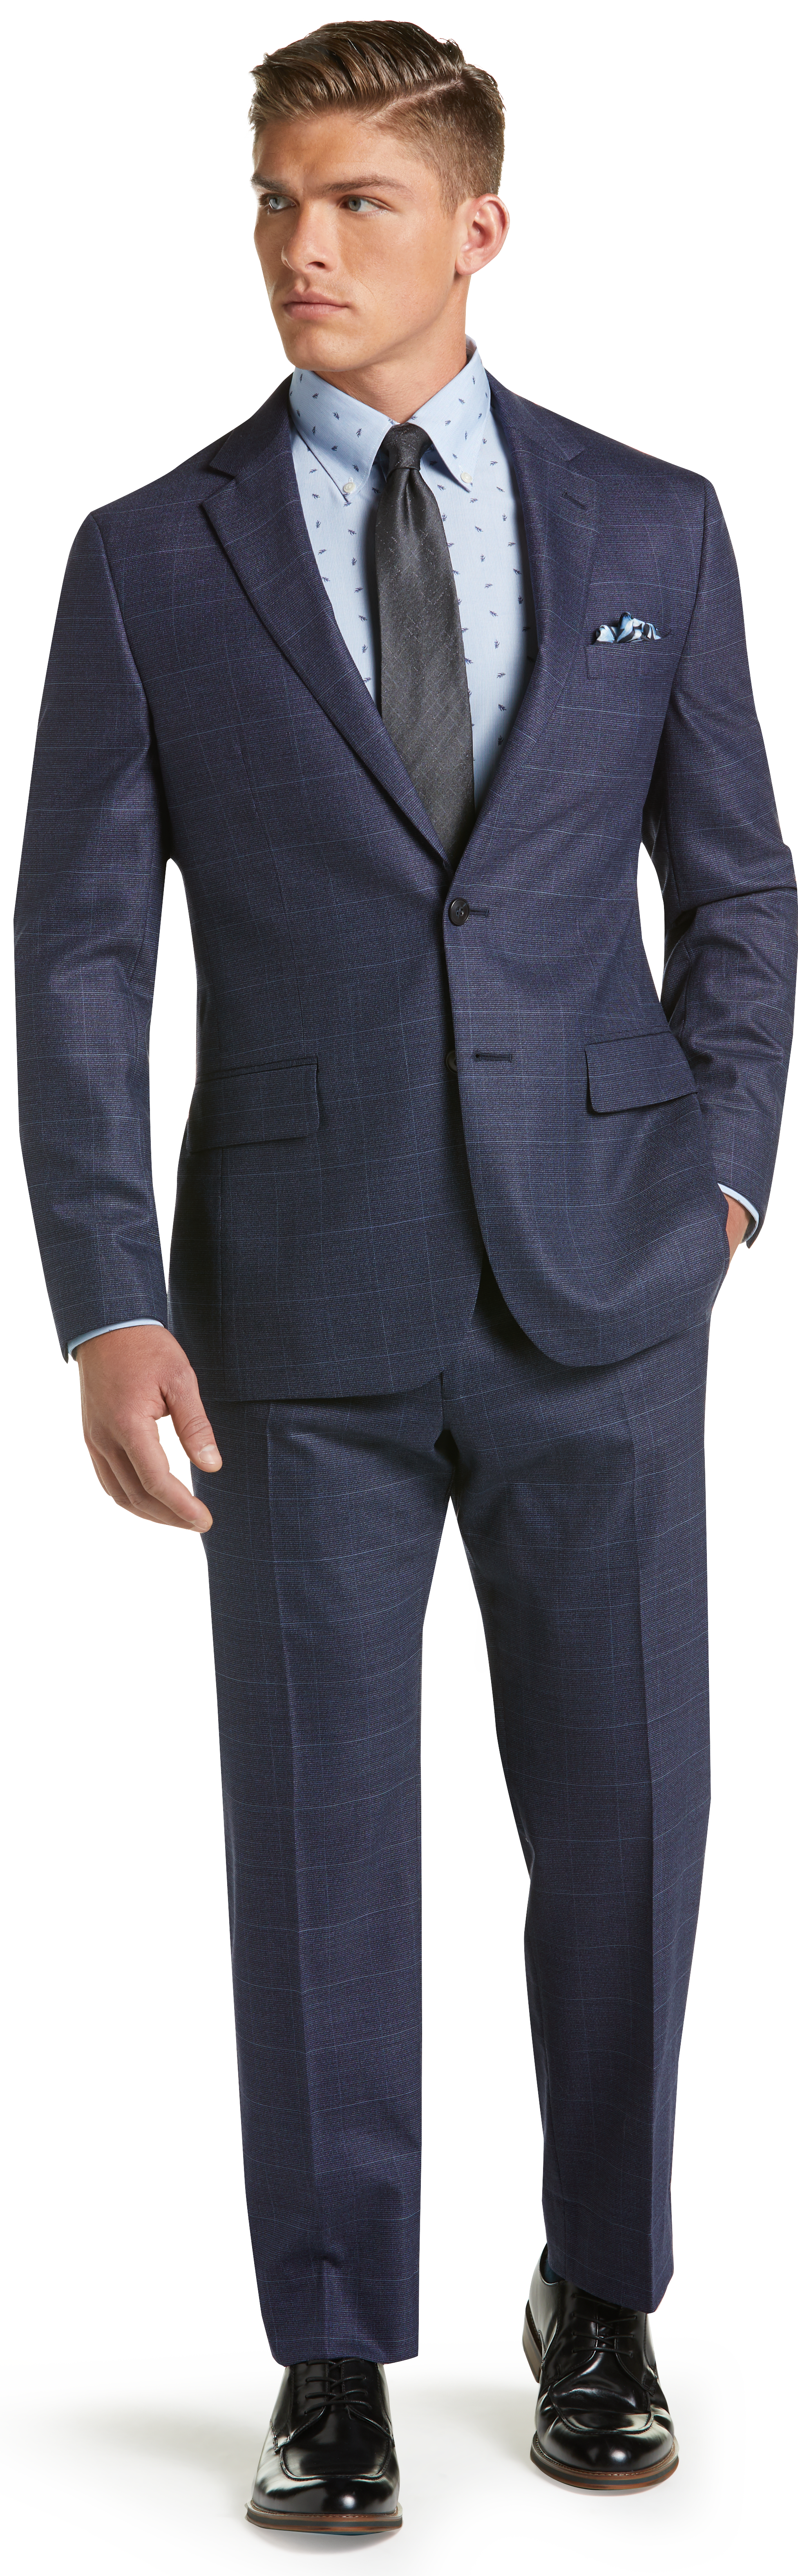 1905 Collection Slim Fit Tic Windowpane Suit with brrr°® comfort - Big ...